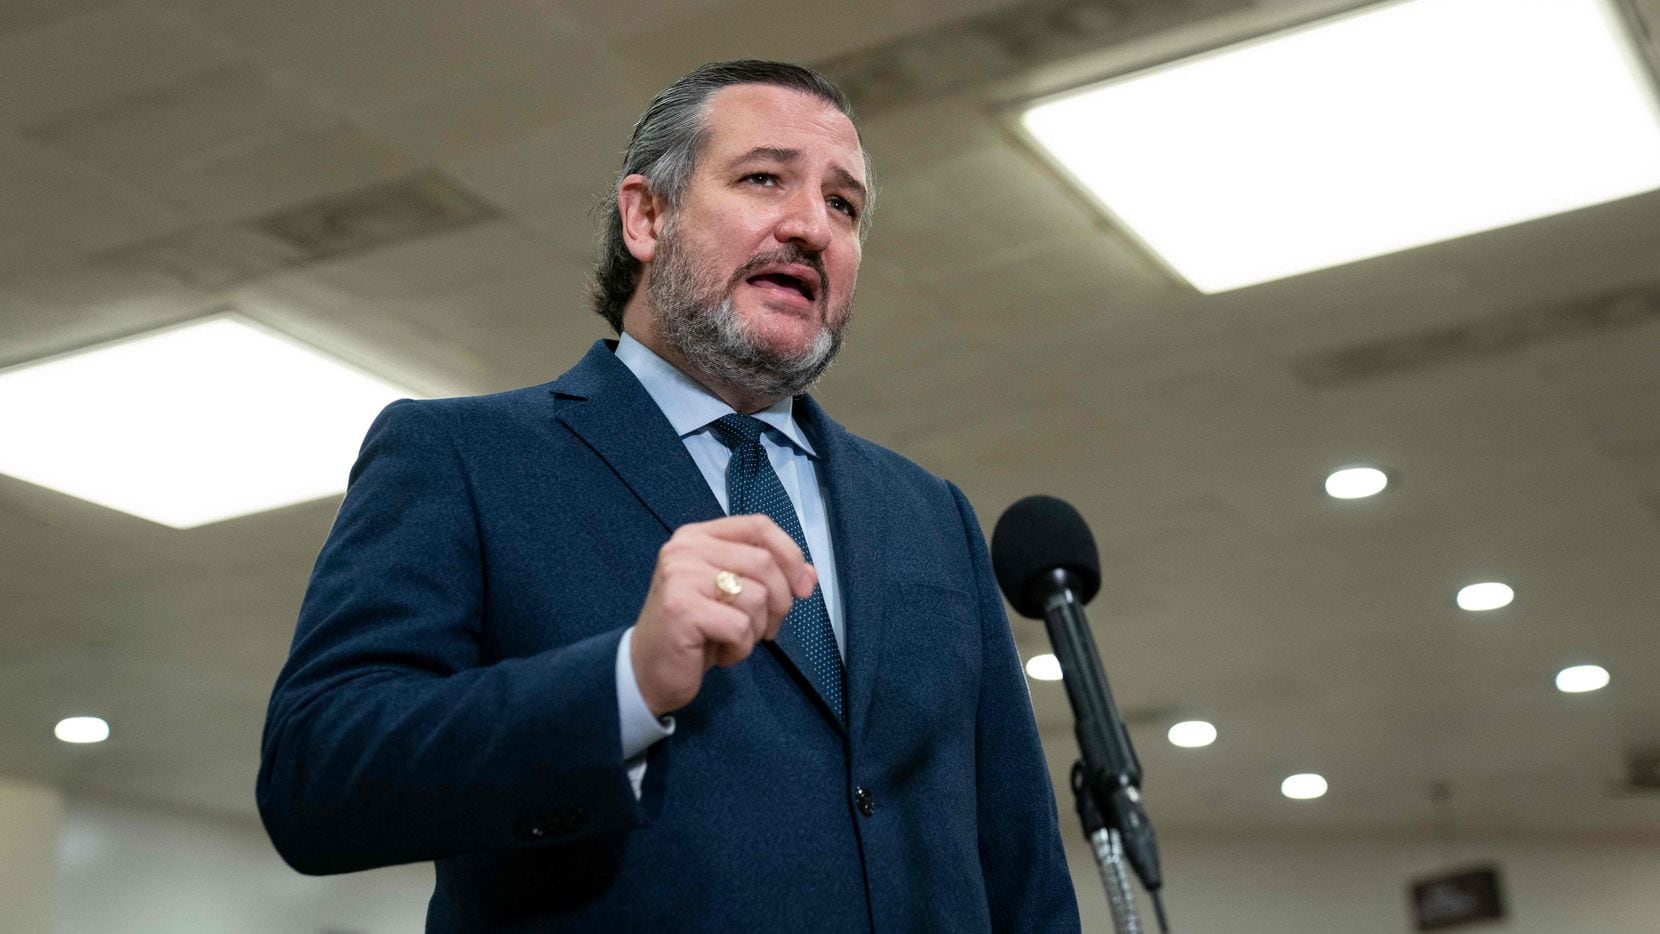 Texas Sen. Ted Cruz had just last year mocked California for having power outages during a...